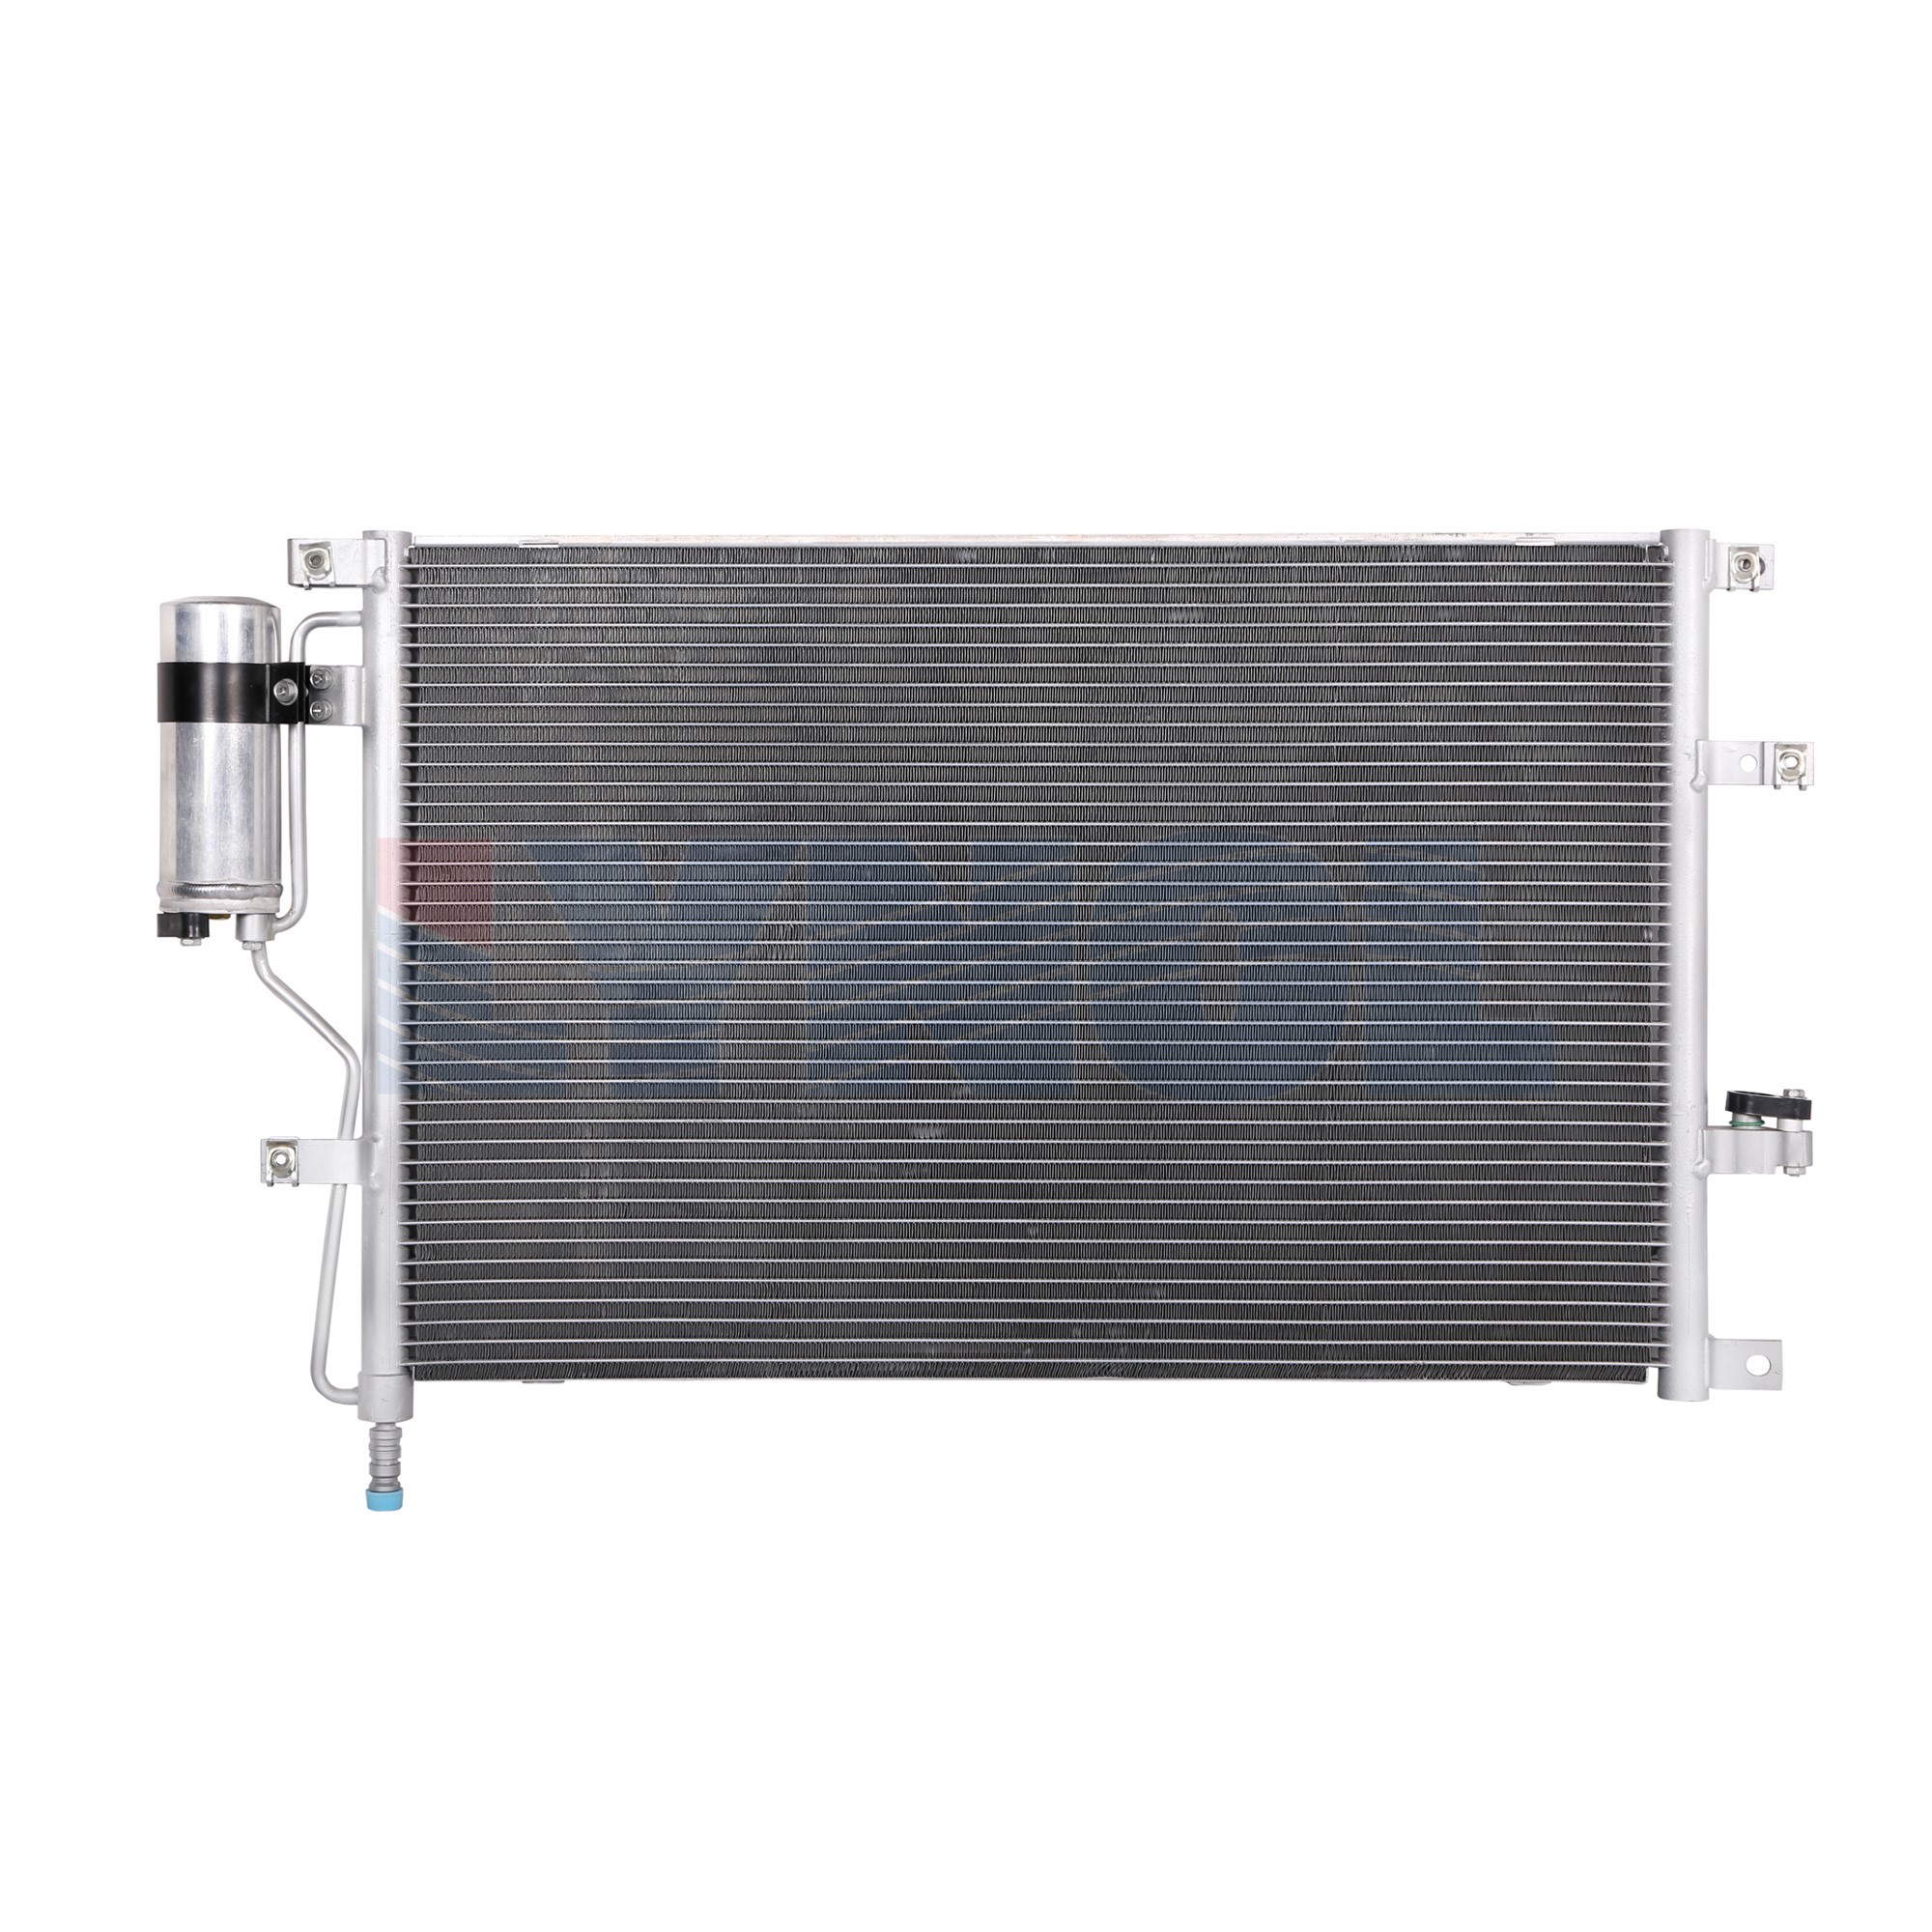 New A/C Condenser for S60 XC70 S80 V70